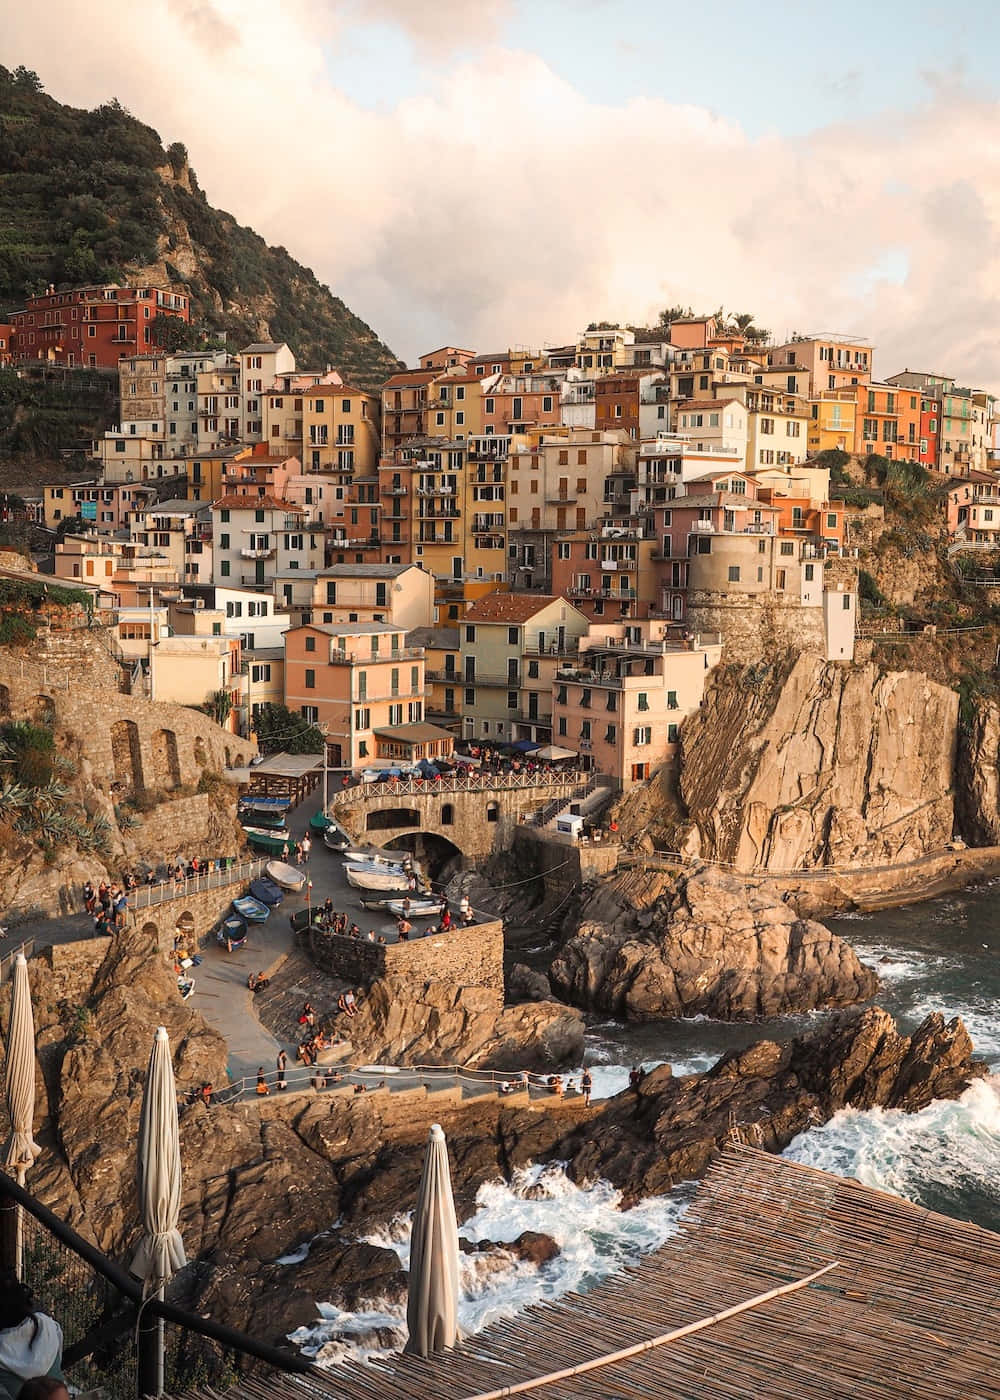 Enjoy the picturesque beauty of Italy